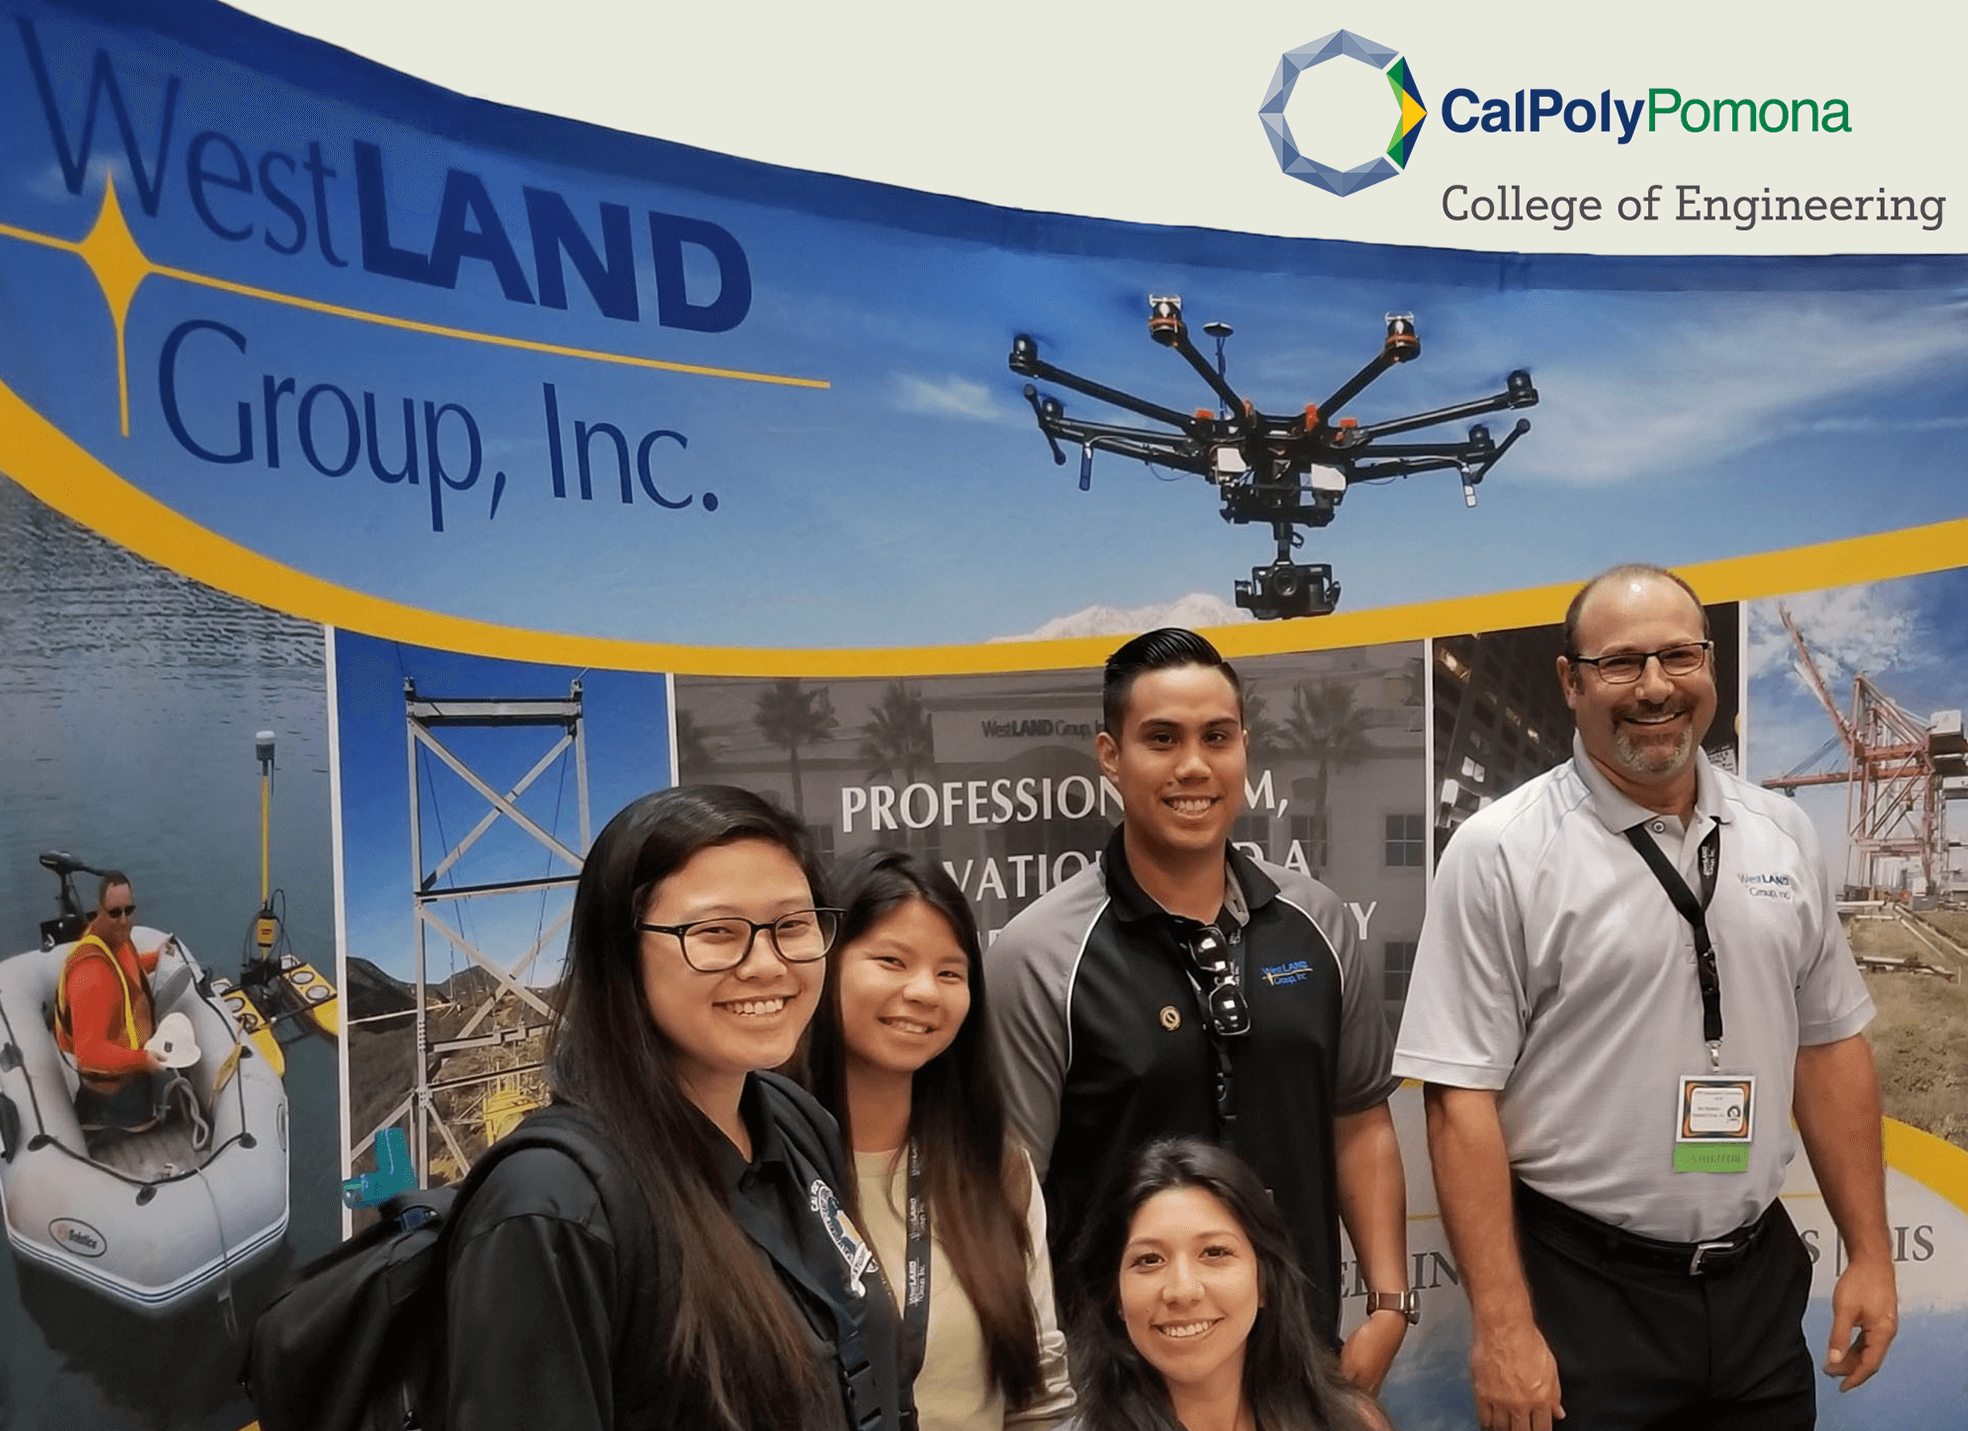 WestLAND's Group Cal Poly Geomatics Conference Image